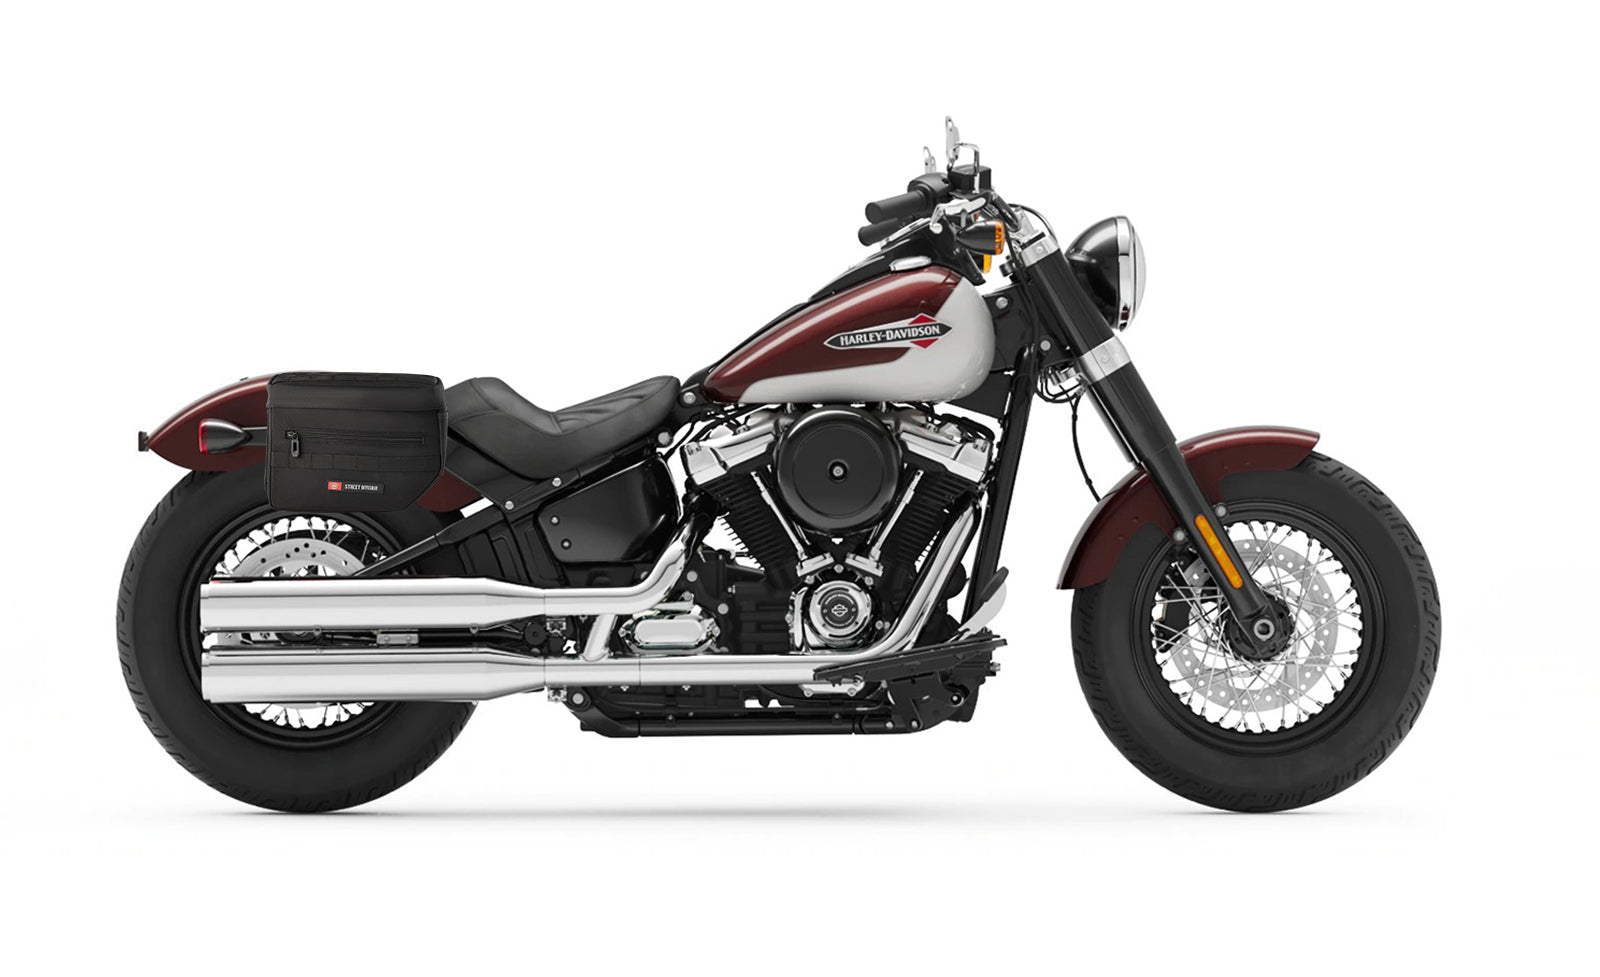 14L - Patriot Small Throw Over Saddlebags for Harley Softail Slim FLSL on Bike Photo @expand